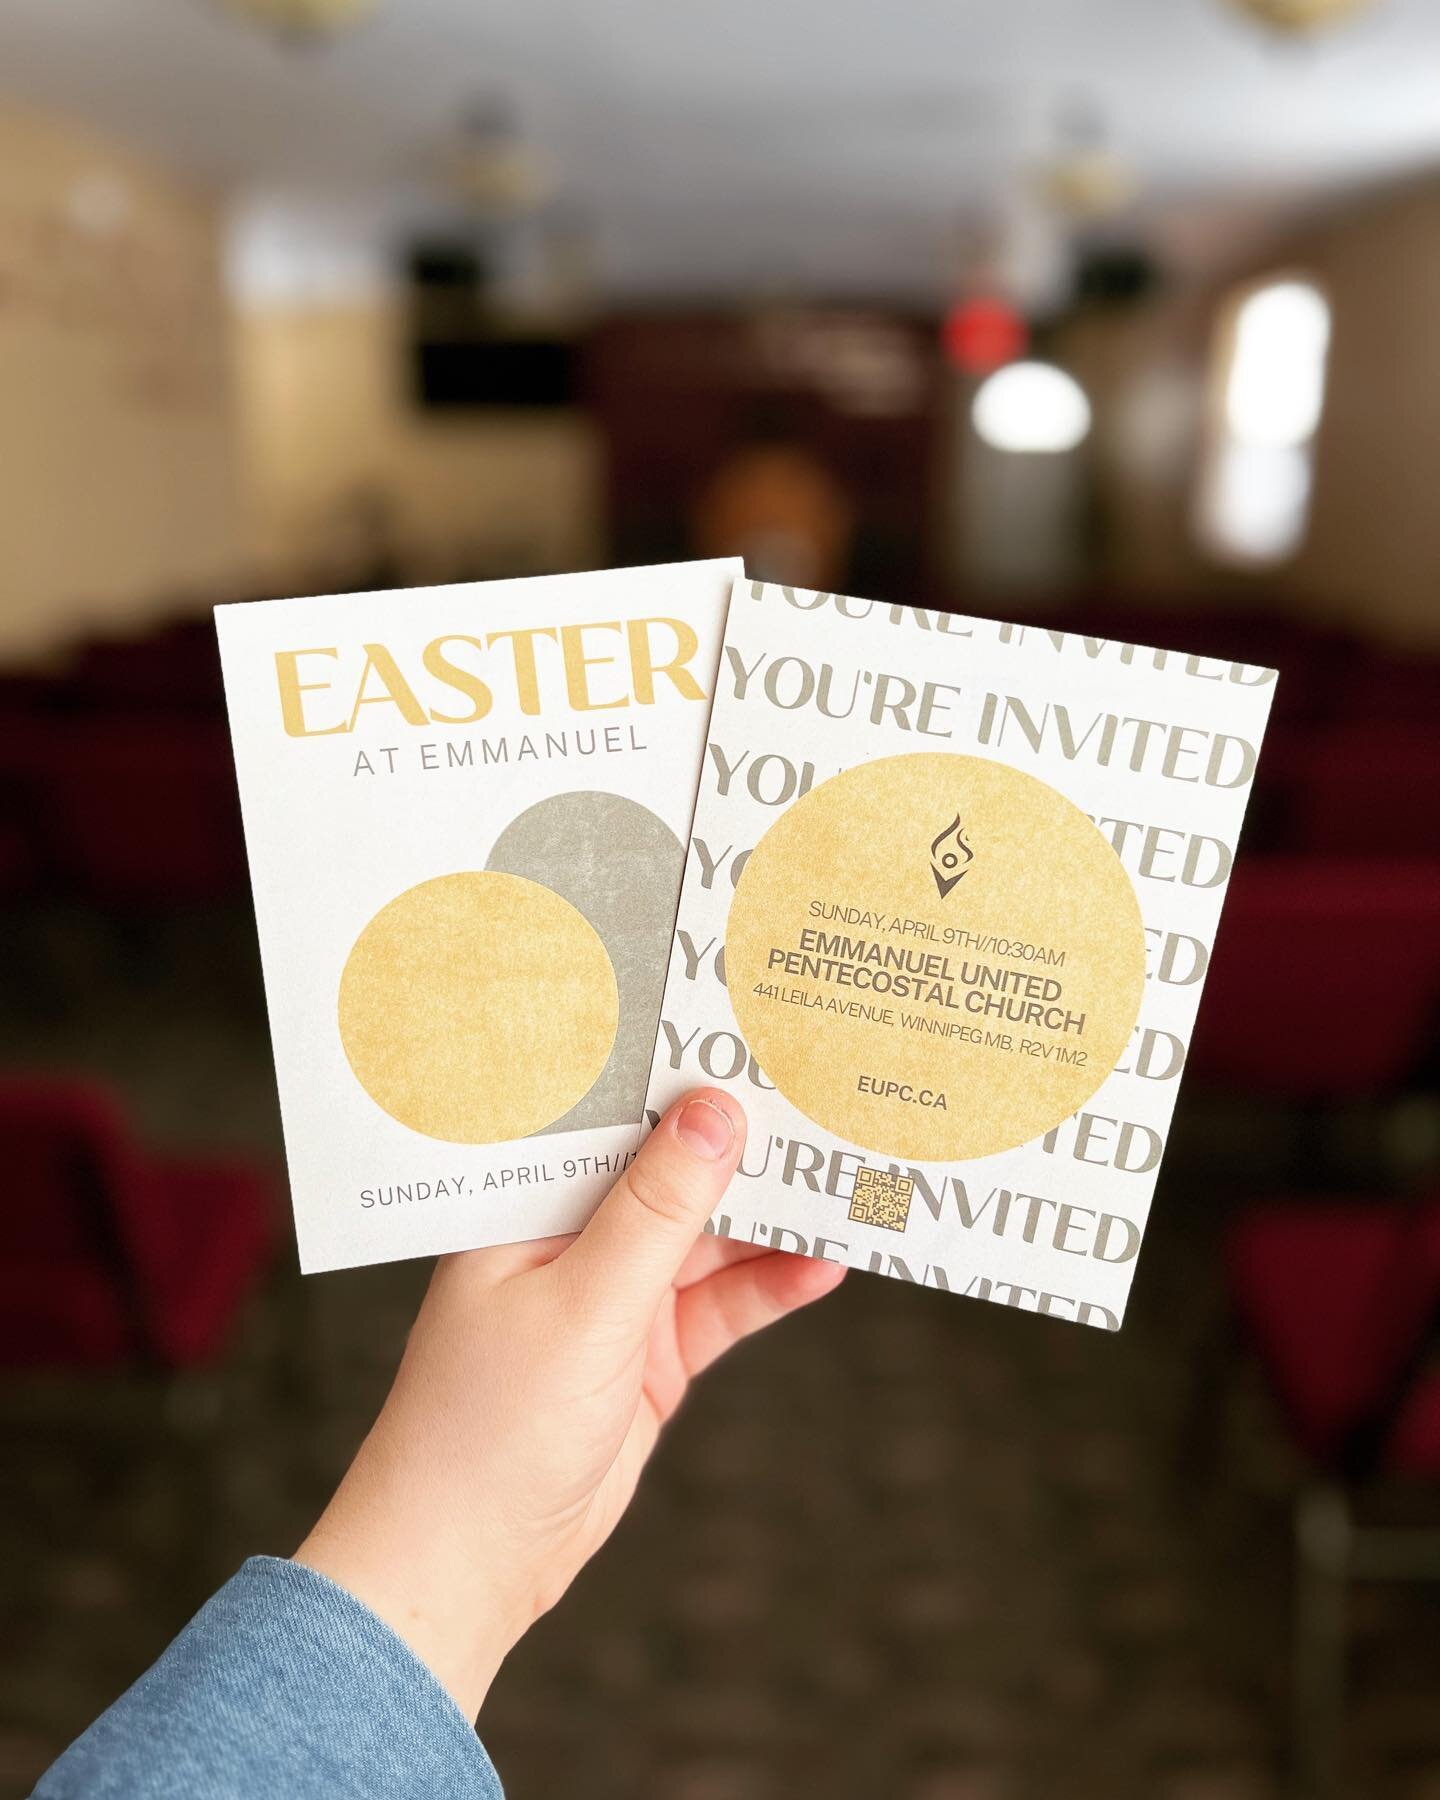 We can&rsquo;t wait to see you tomorrow! 🙌🏼

10:30AM
441 Leila Avenue
.
.
.

 #winnipeg #winnipeglocal #winnipegbusiness #wpgnow #wpg #wpglocal #wpgoftheday #winnipegoftheday #winnipegevent #winnipegmoms #winnipegparents #wpgmom #wpgmoms #easter #w